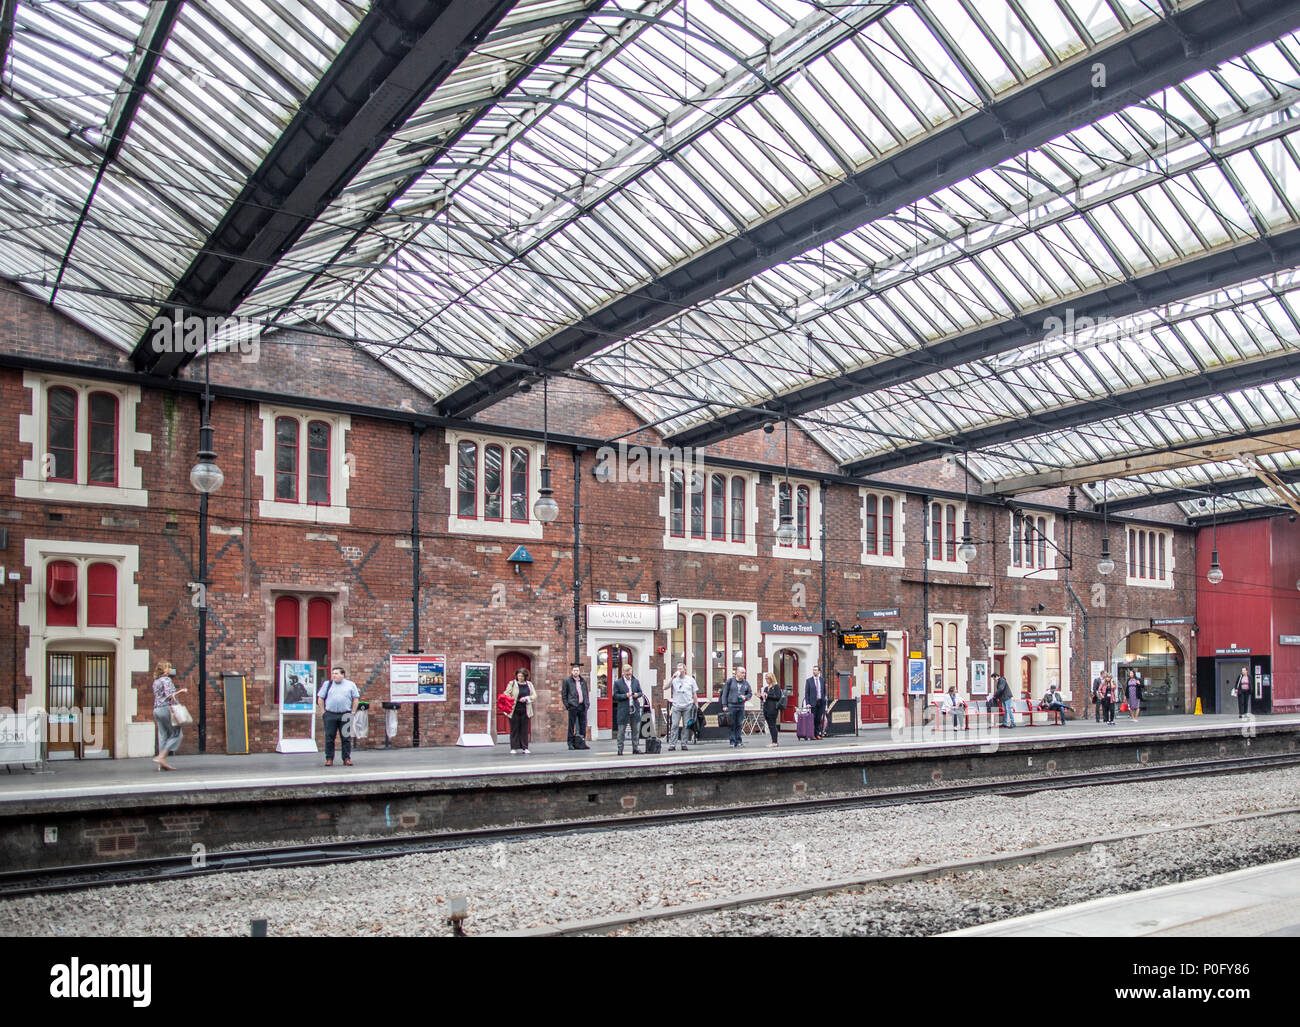 Train station at Stoke on Trent where travellers wait for a virgin train Stock Photo